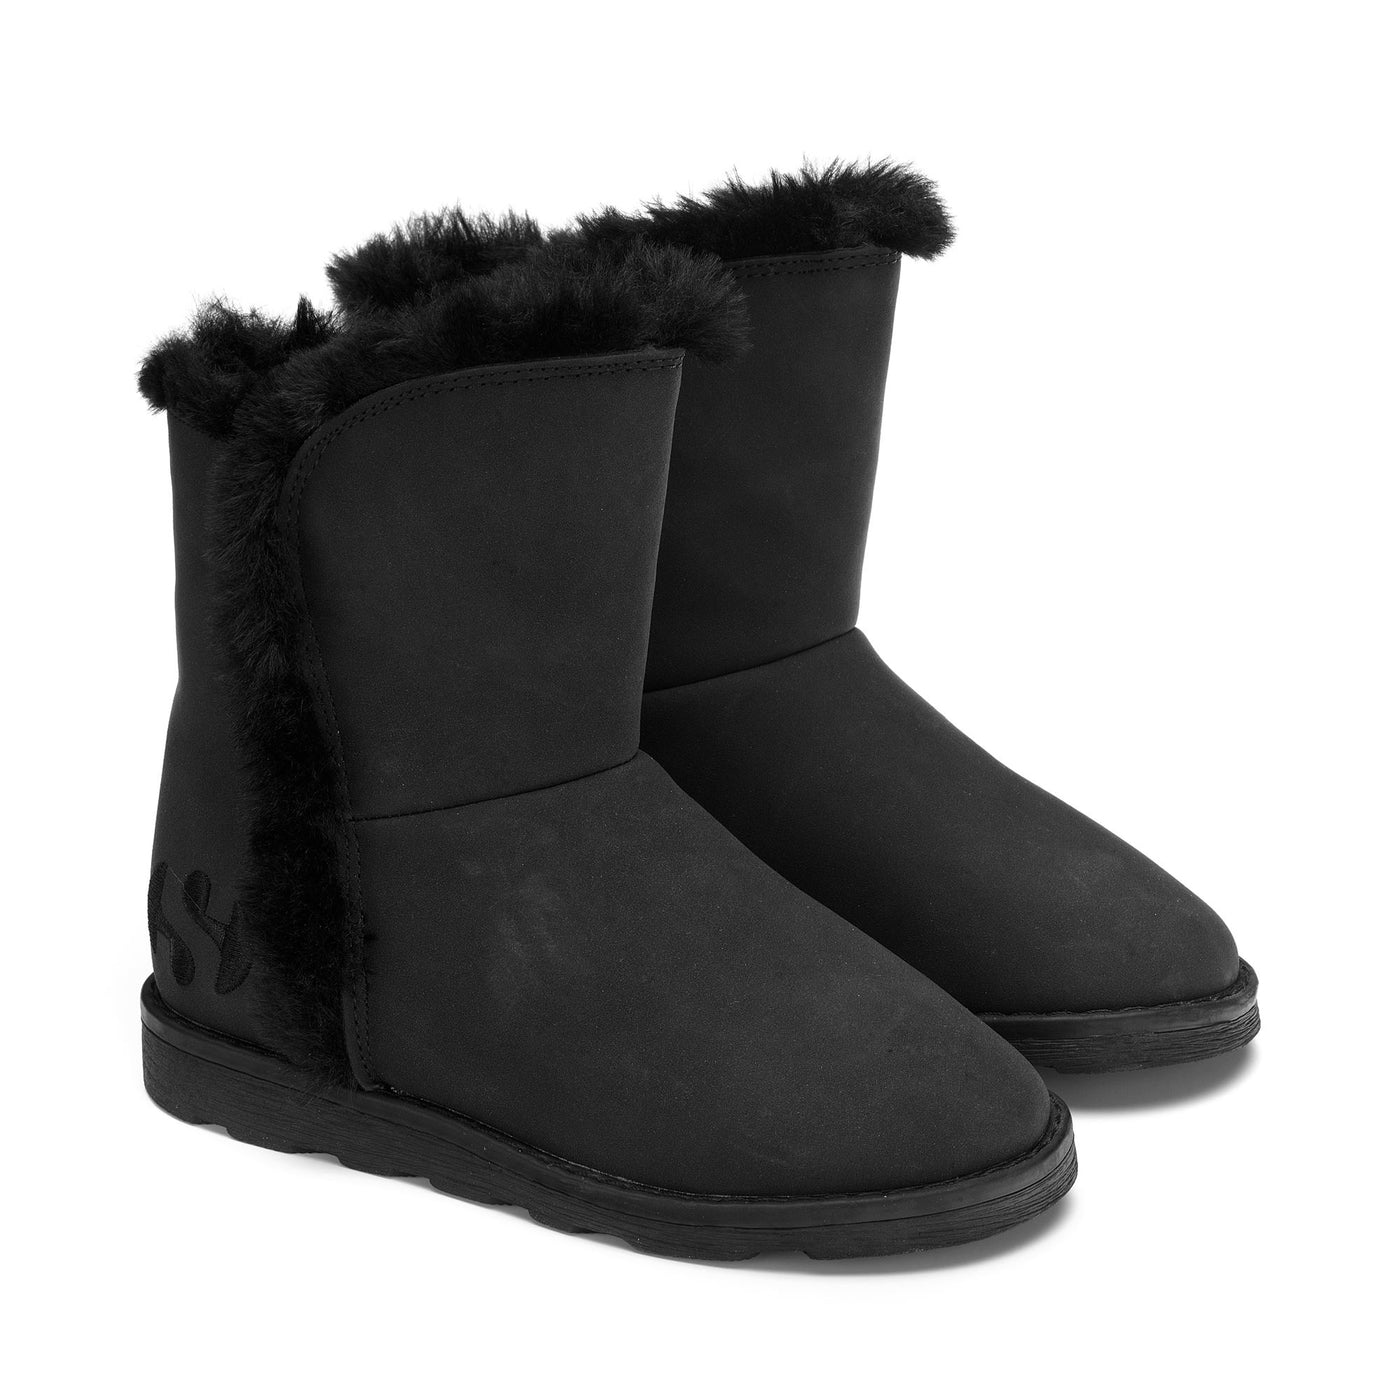 Boots Girl 4033 KIDS FAUX SUEDE Boot TOTAL BLACK Dressed Front (jpg Rgb)	